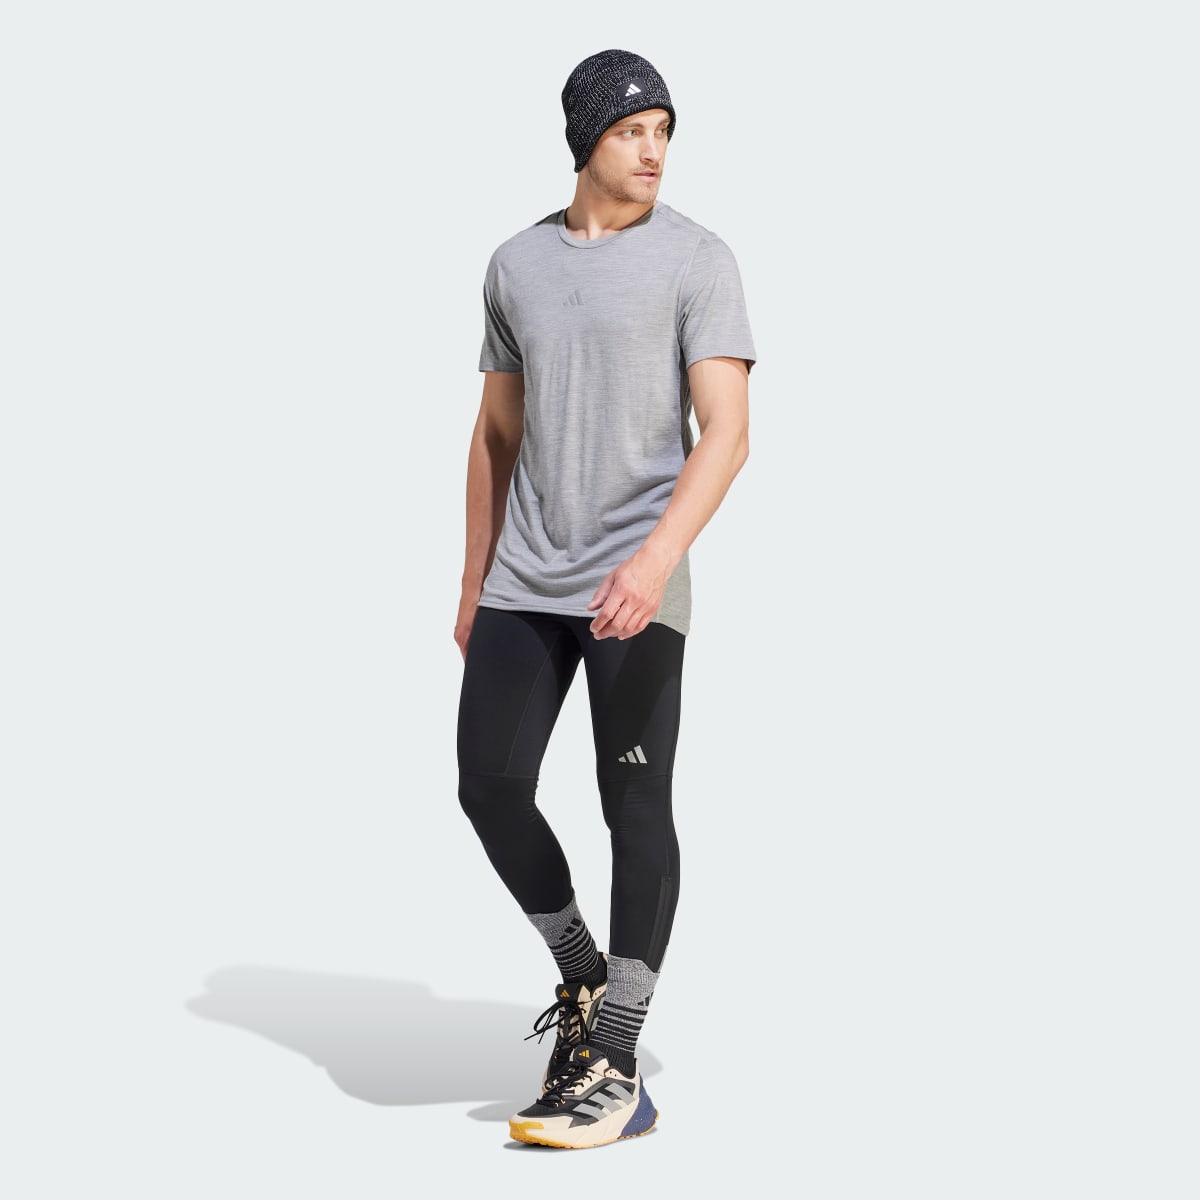 Adidas Ultimate Running Conquer the Elements AEROREADY Warming Leggings. 5